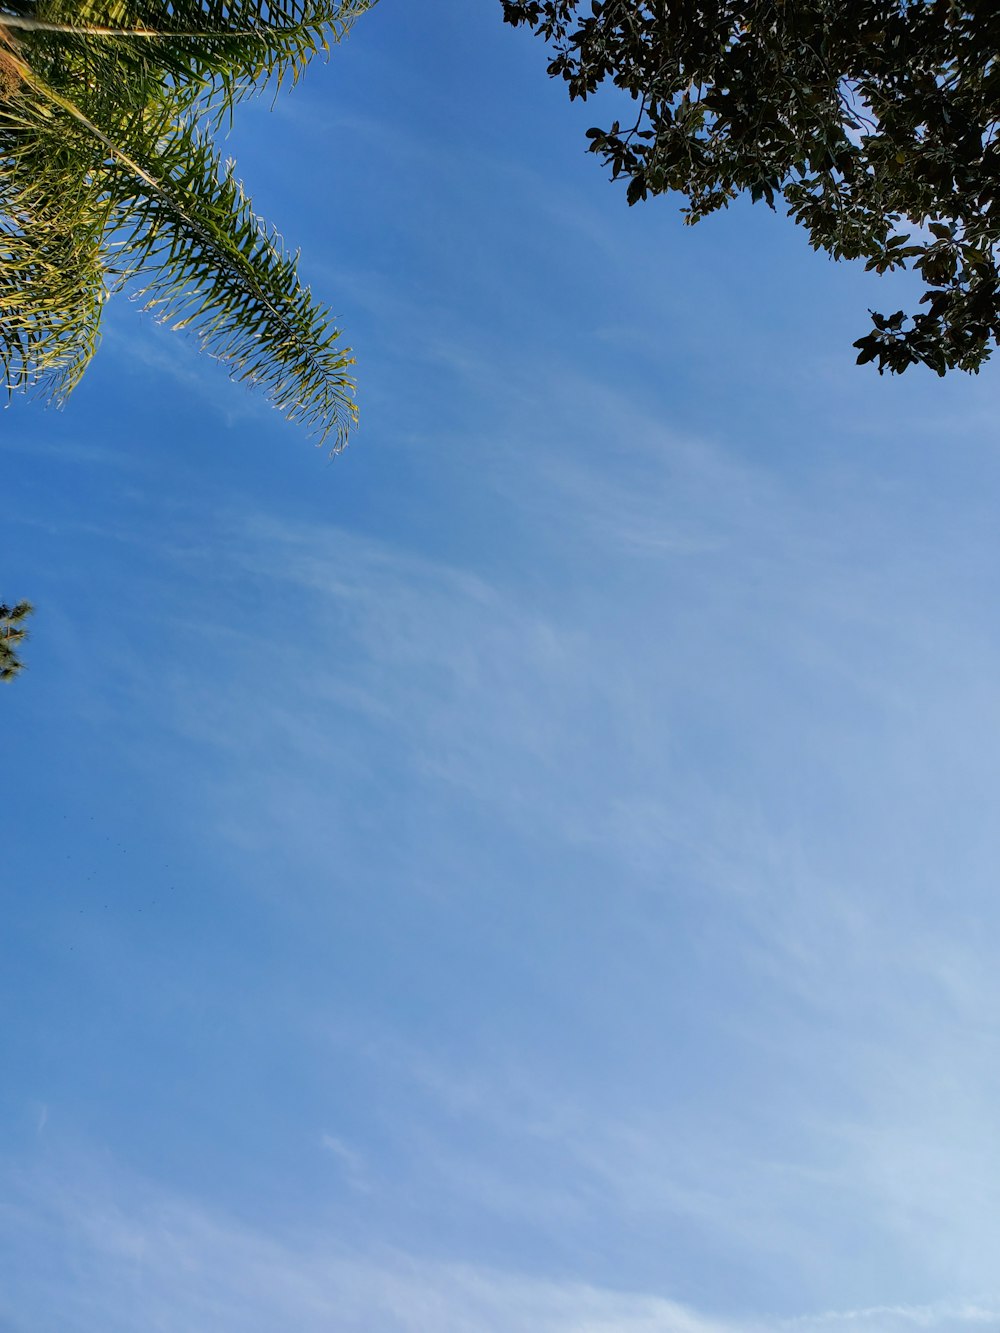 a palm tree and a blue sky with clouds